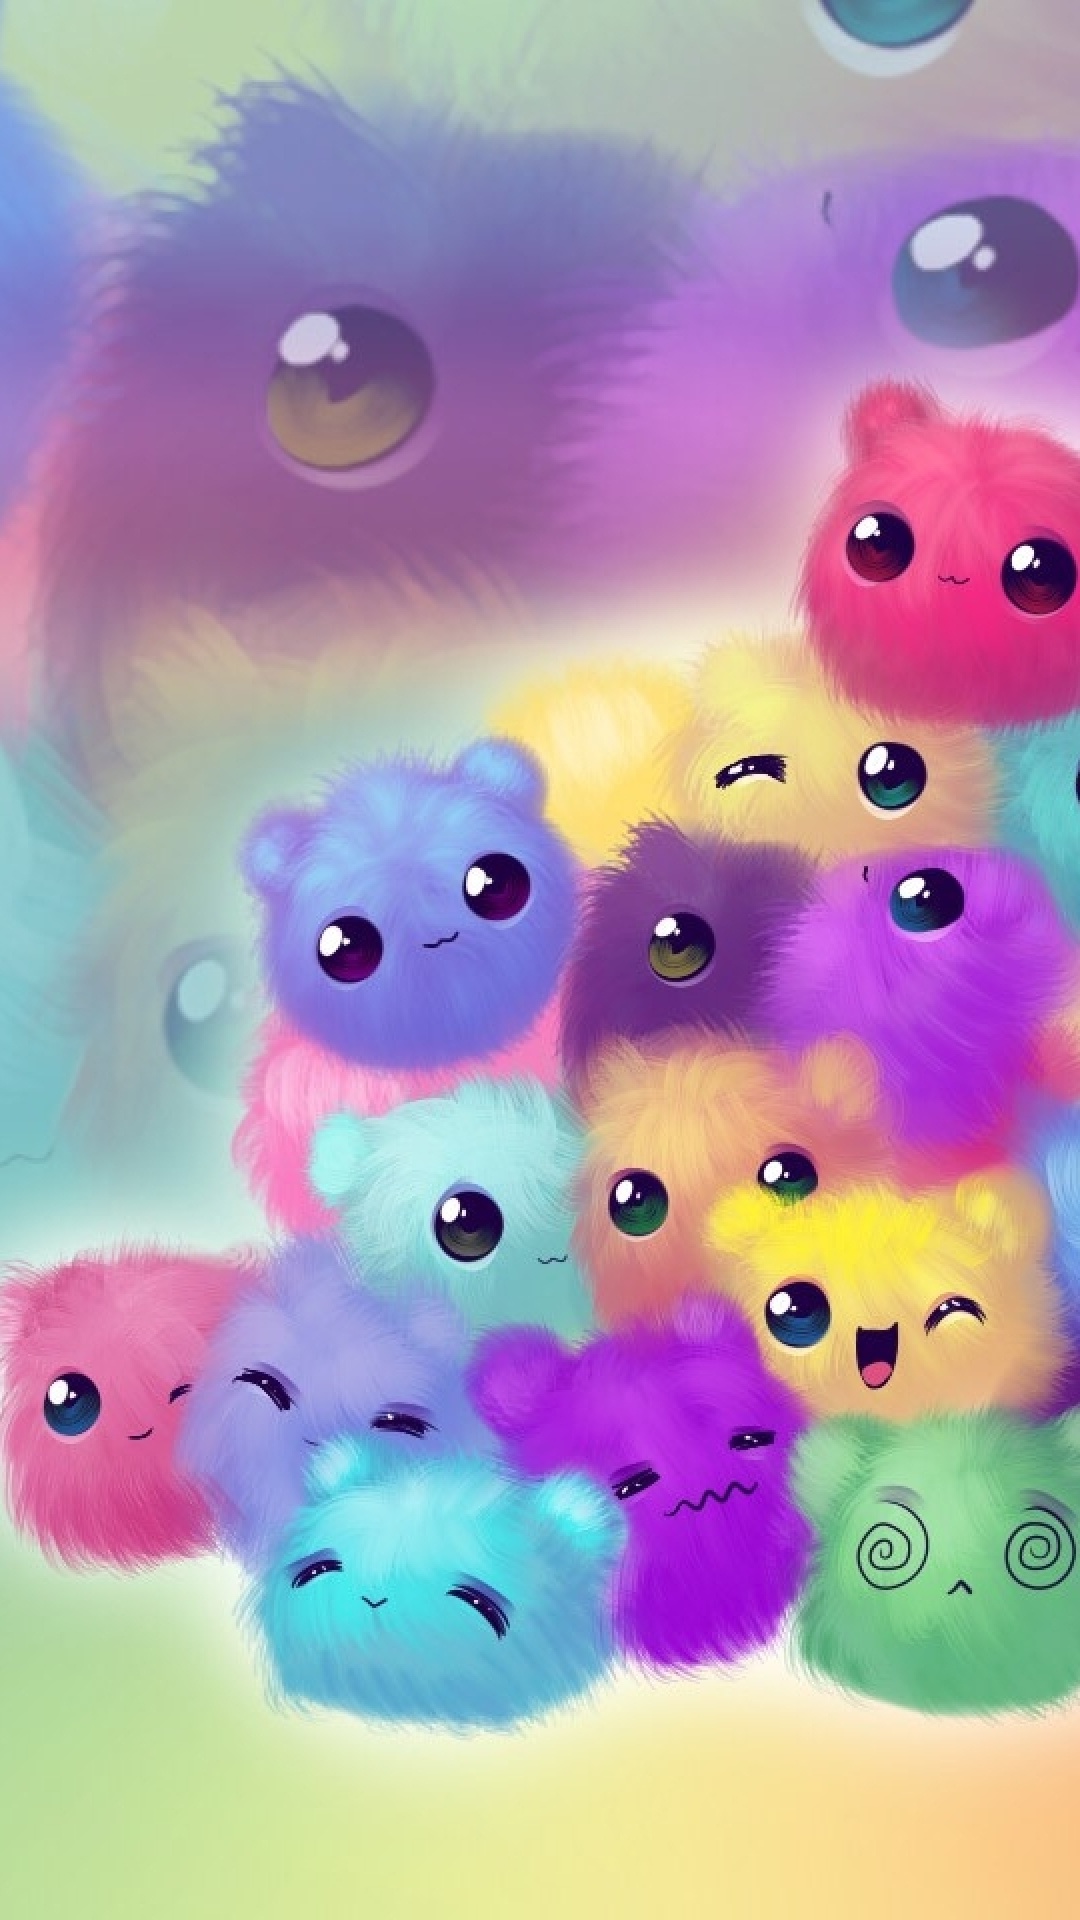 Cute Htc One Max Wallpaper Android